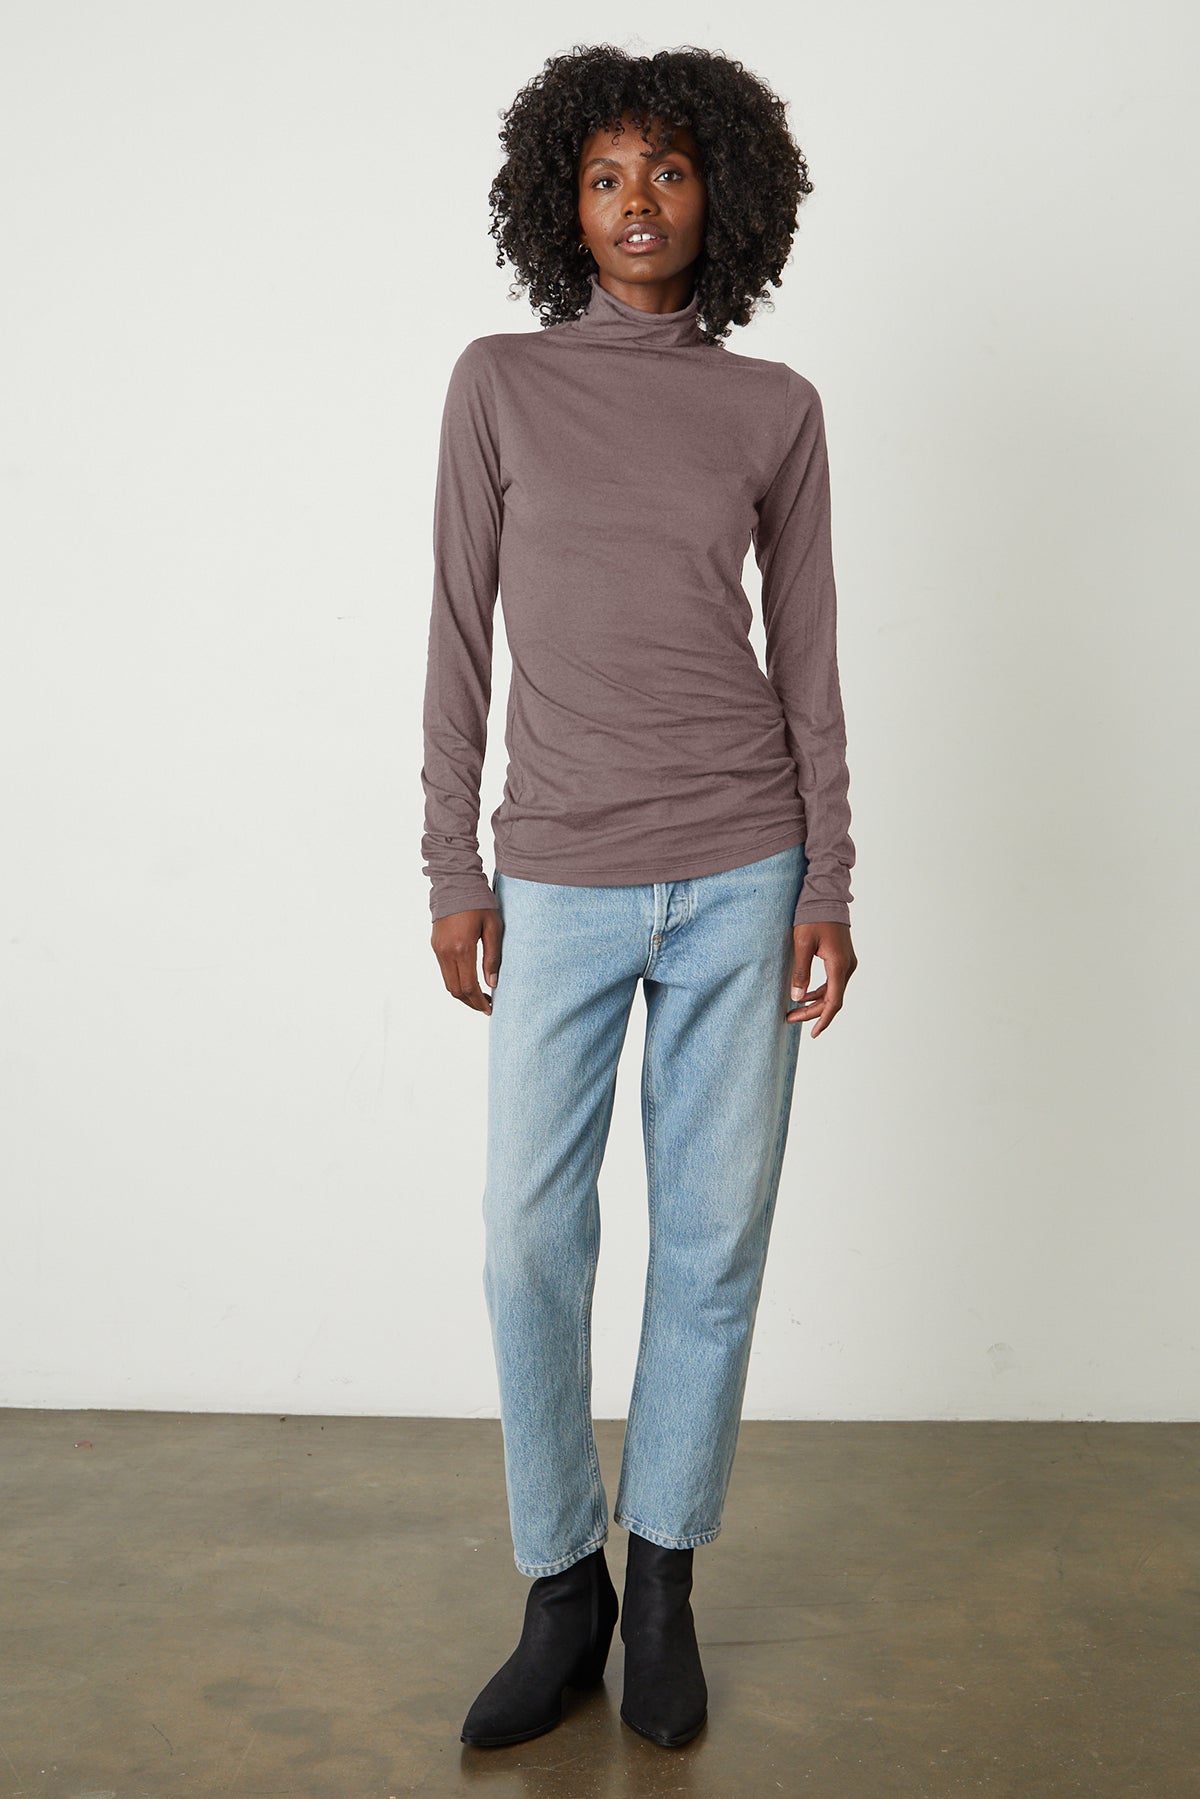 Talisia Gauzy Whisper Fitted Mock Neck Tee in Fawn with light blue denim and black boots full length front-26011186168001